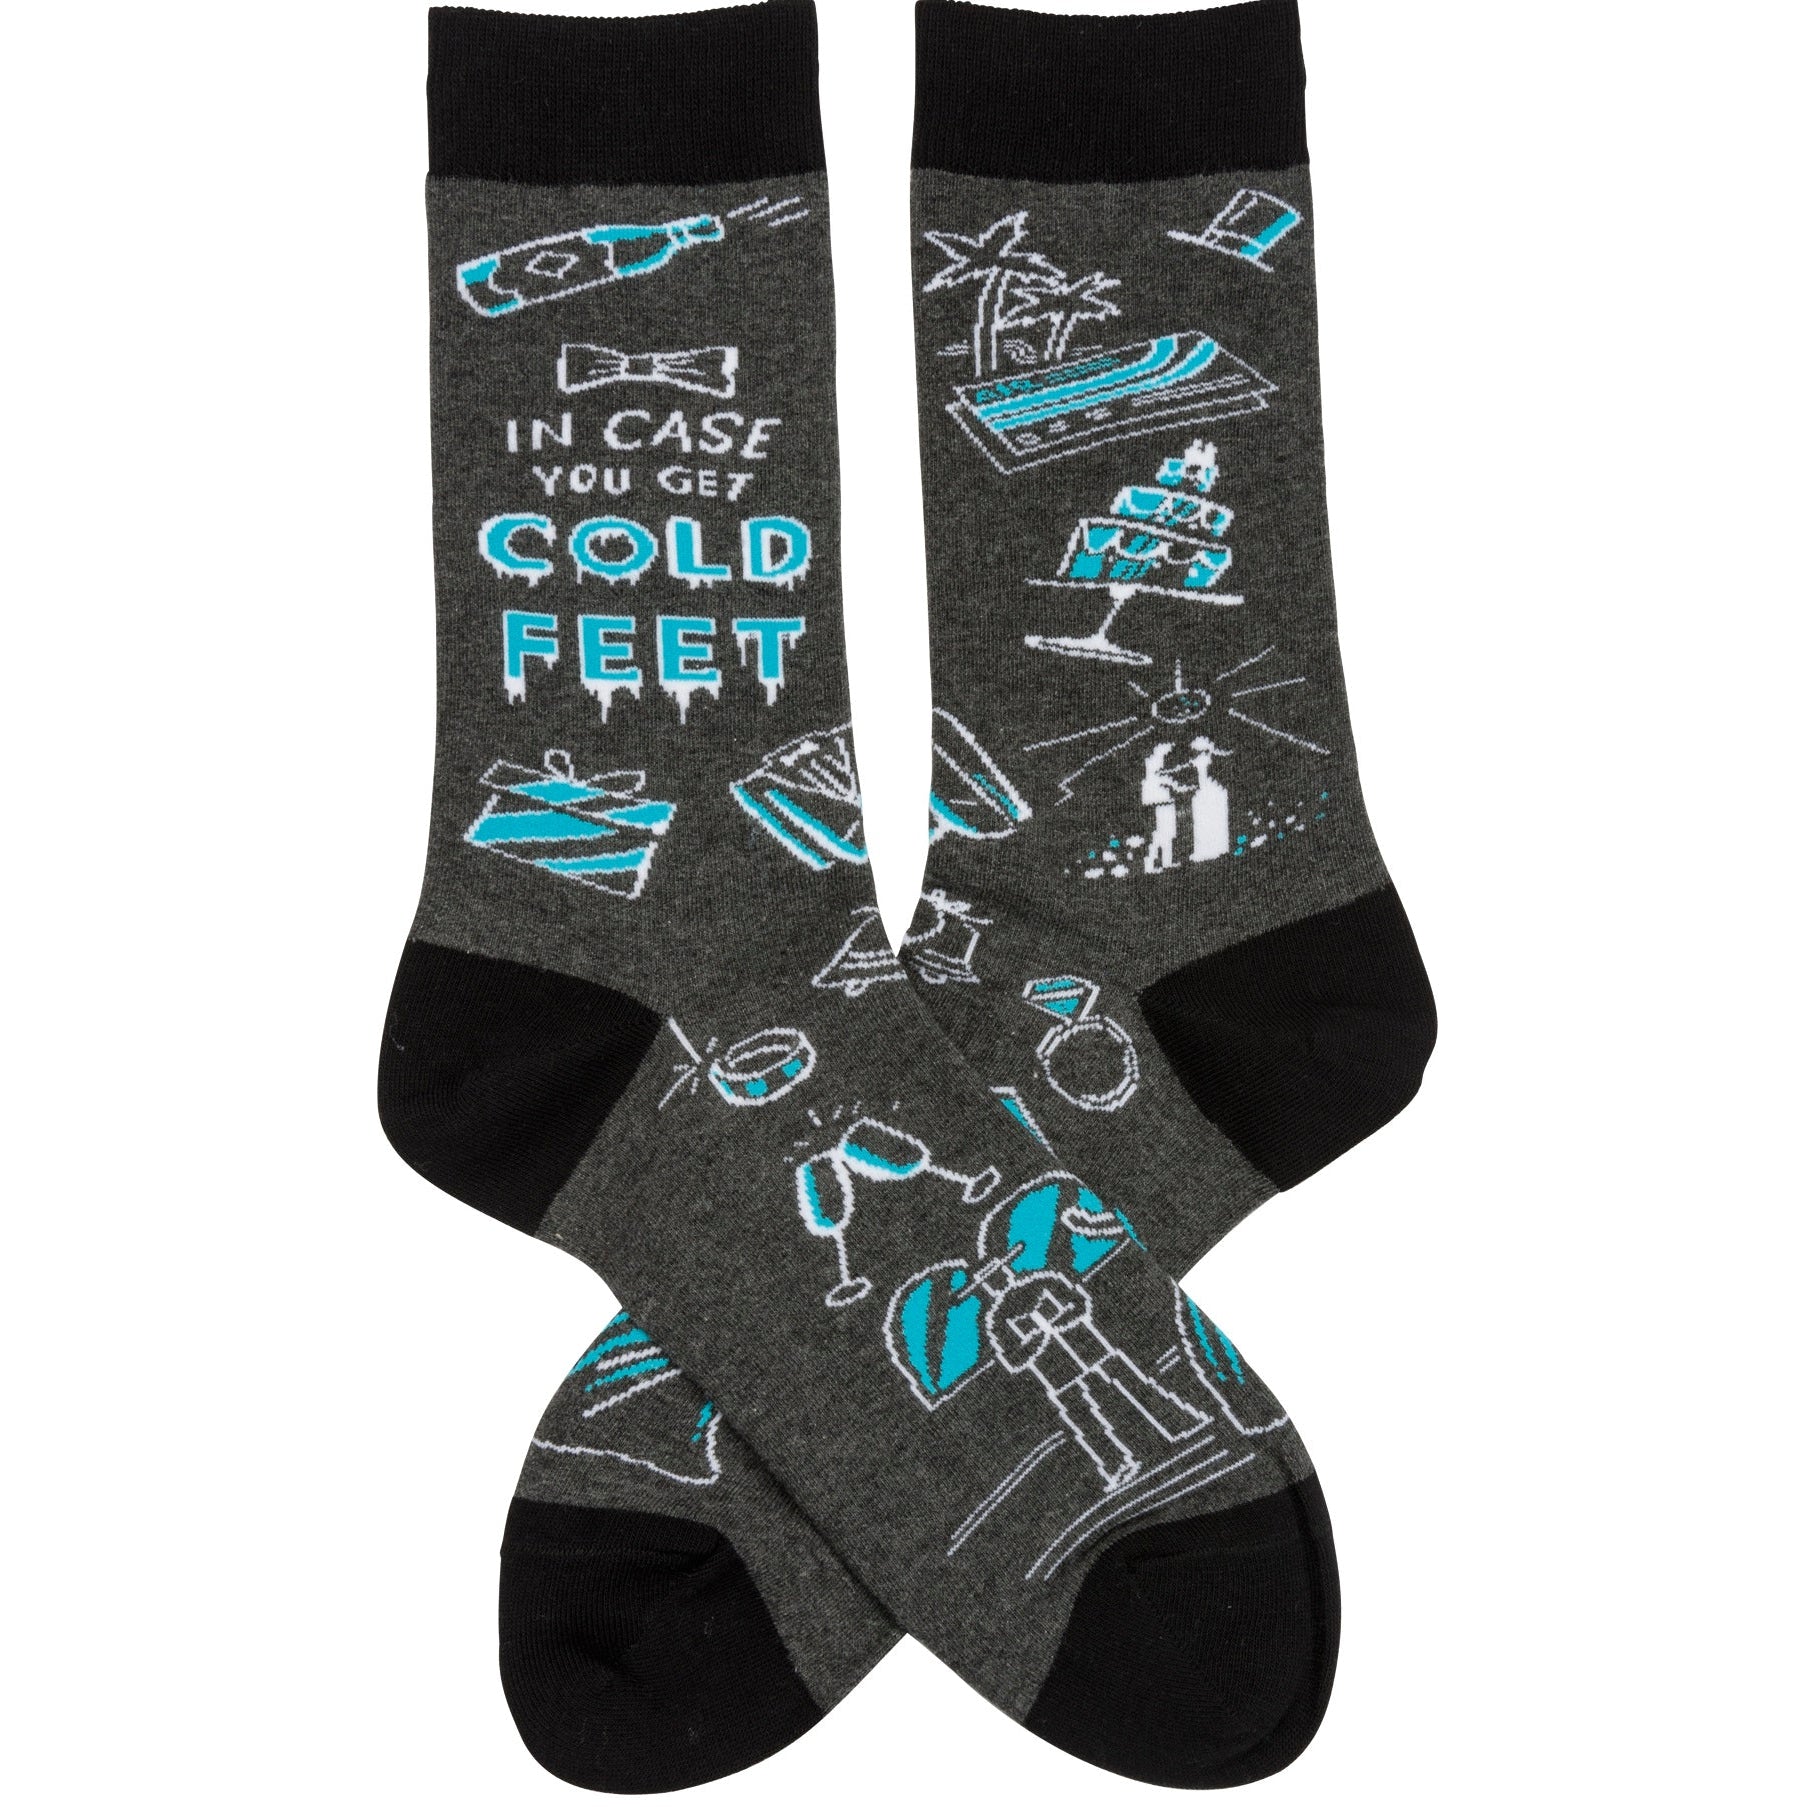 In Case You Get Cold Feet Crew Black Blue Funny Novelty Socks with Cool Design, Bold/Crazy/Unique/Quirky Specialty Dress Socks